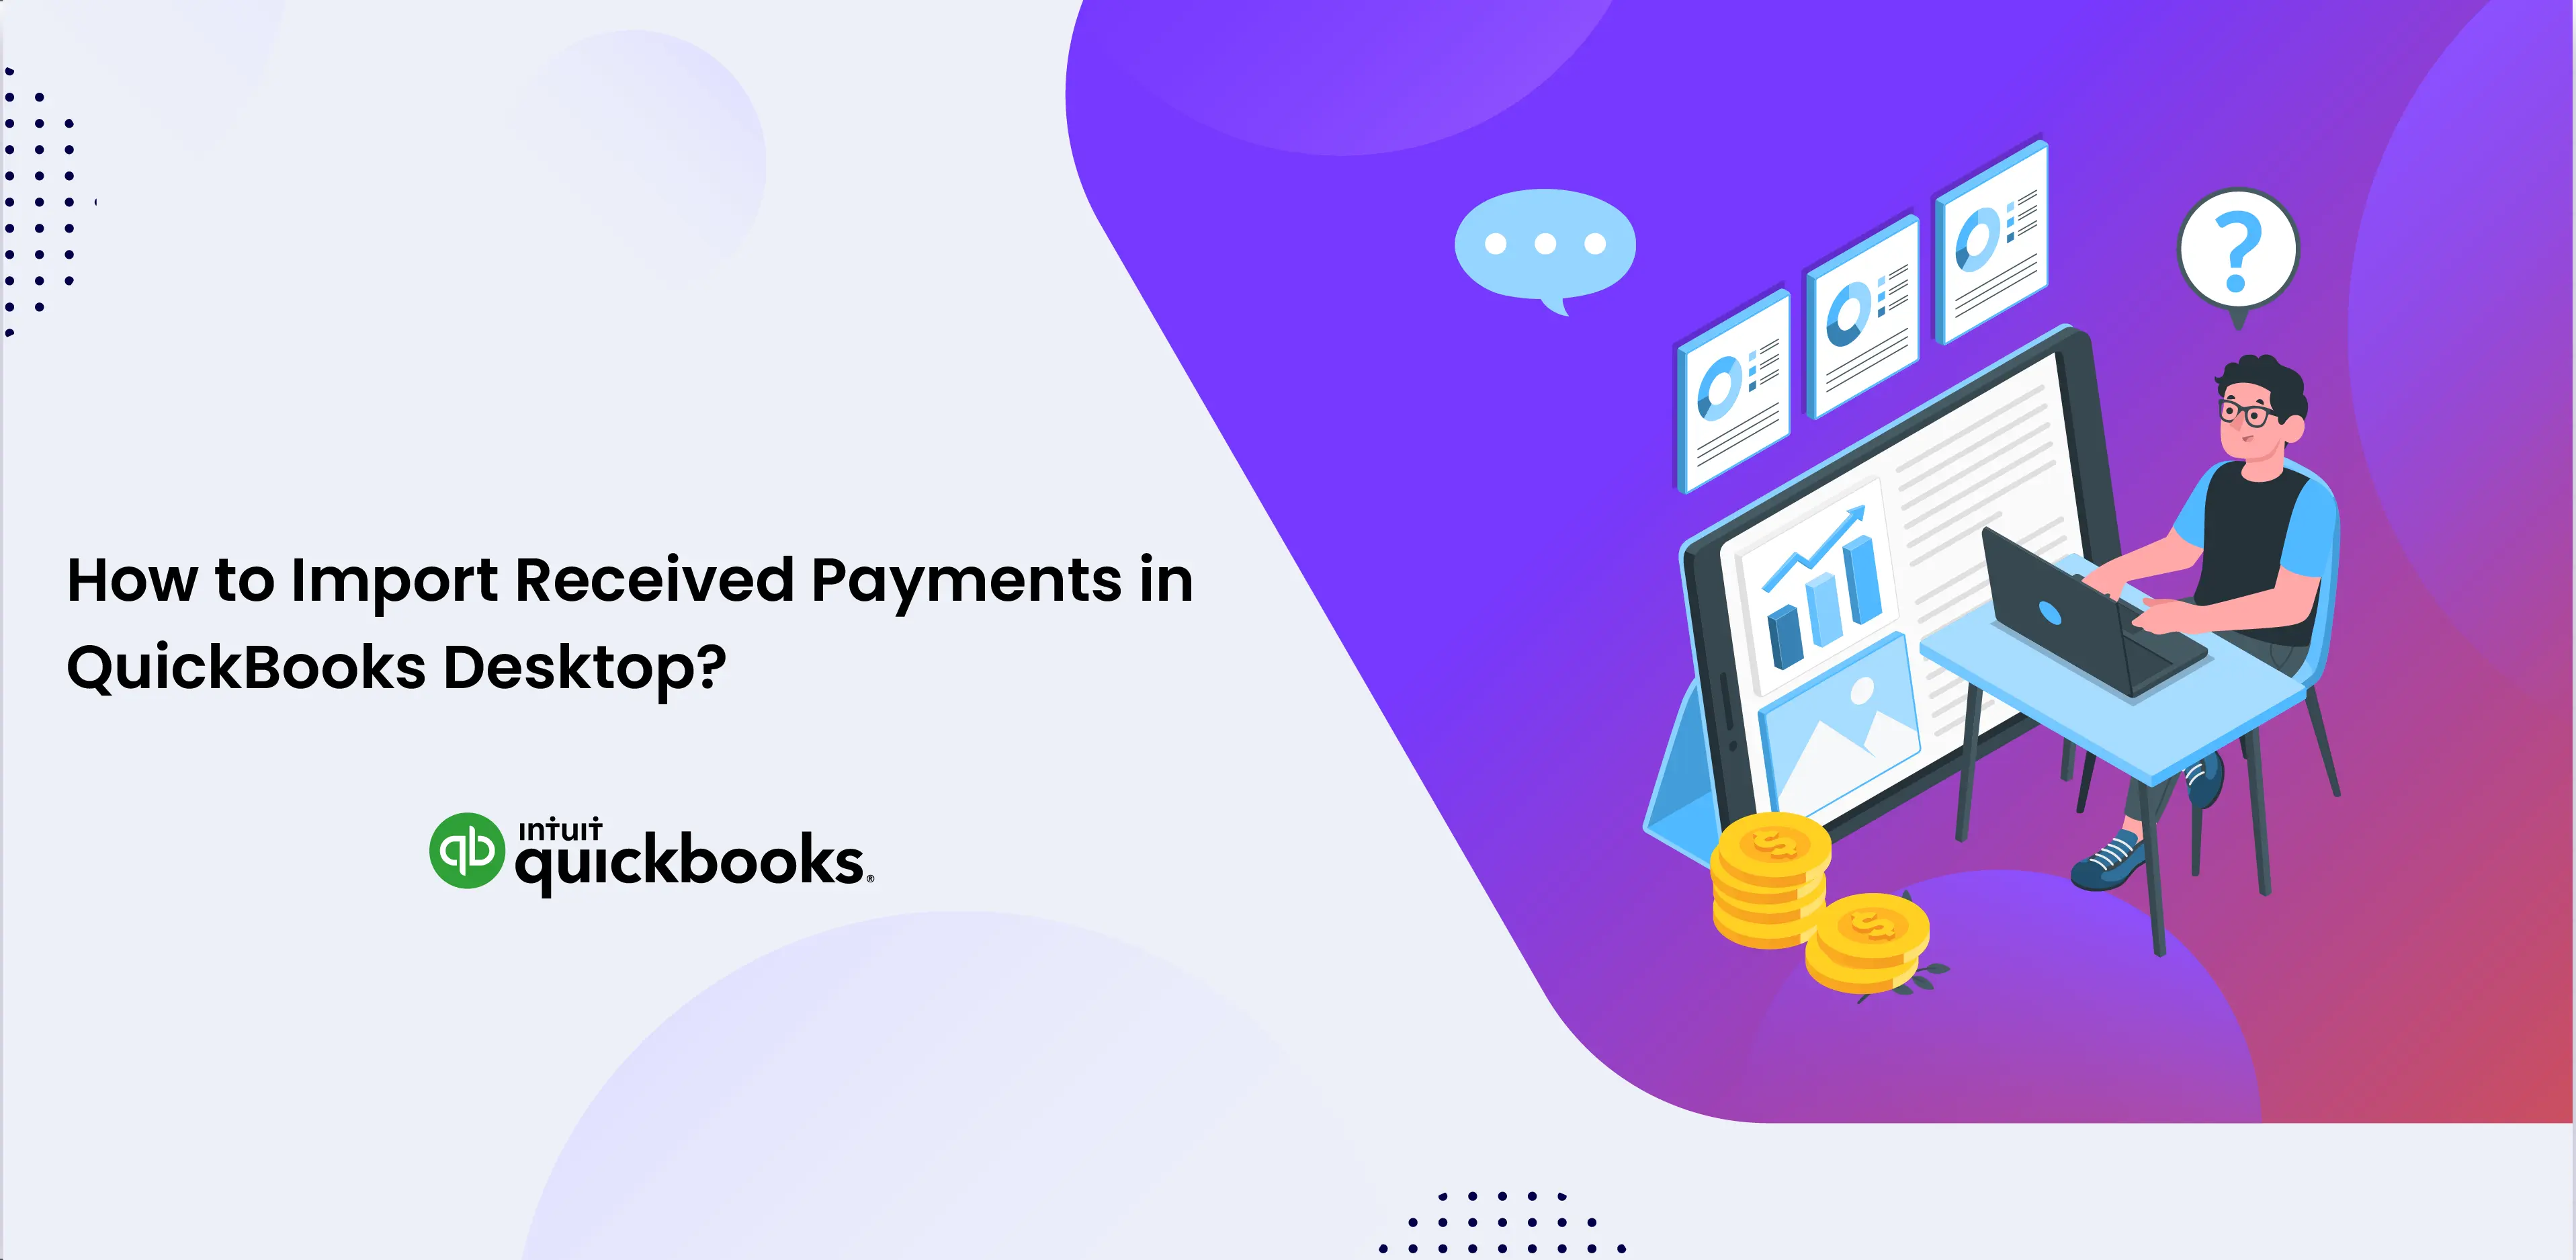 import payments to quickbooks